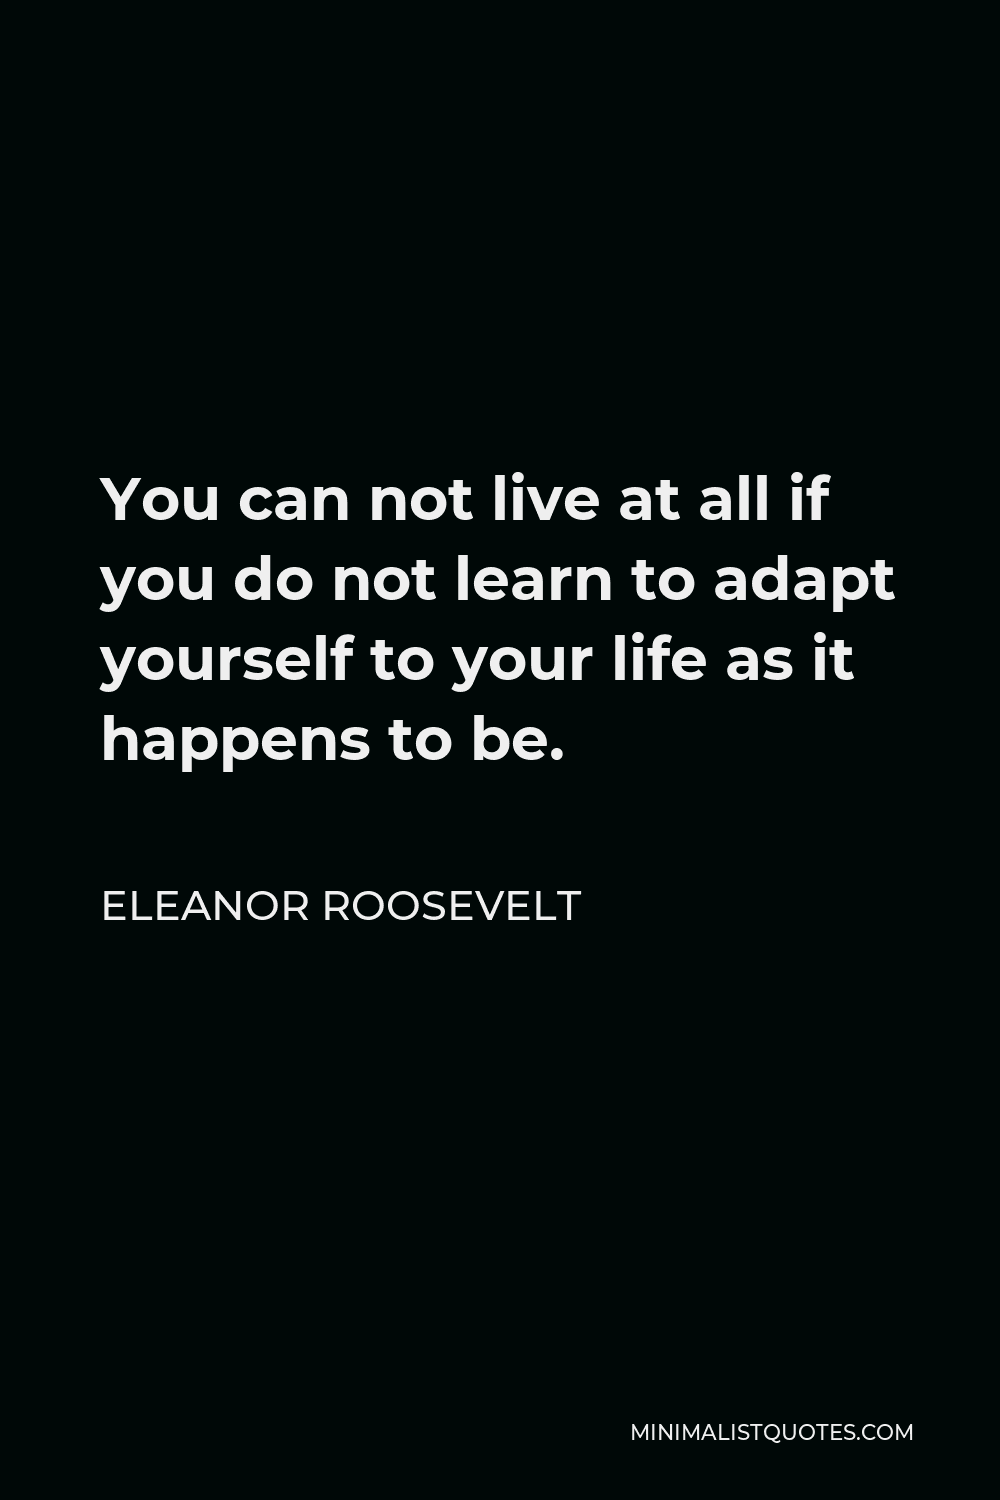 Eleanor Roosevelt Quote - You can not live at all if you do not learn to adapt yourself to your life as it happens to be.